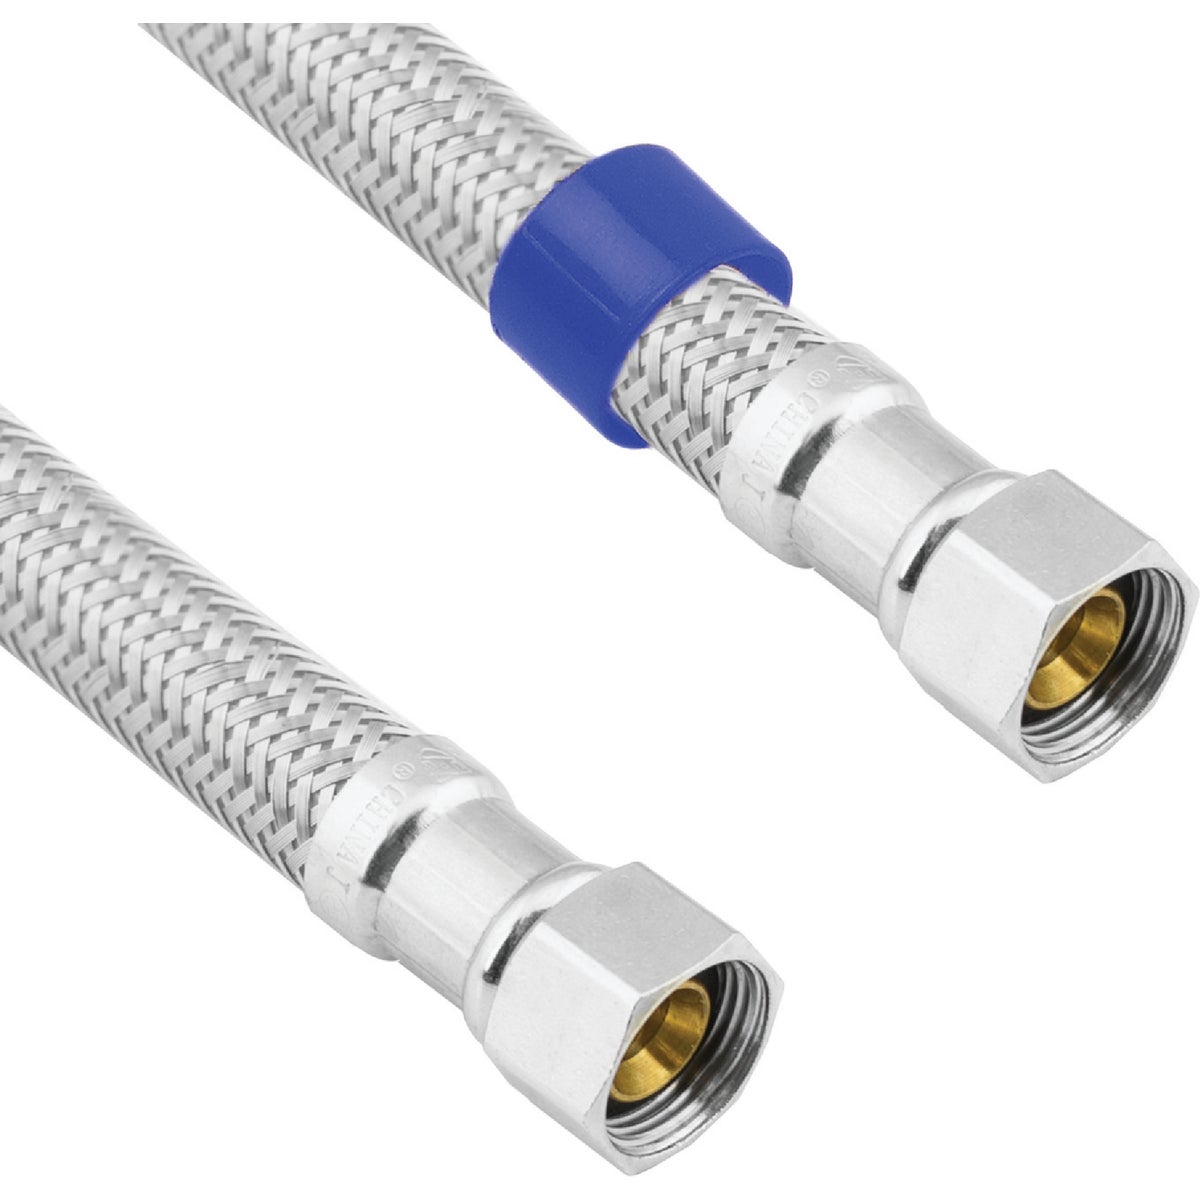 Lasco 3/8 In.C x 3/8 In.C x 48 In. L Braided Stainless Steel Flex Line Appliance Water Connector